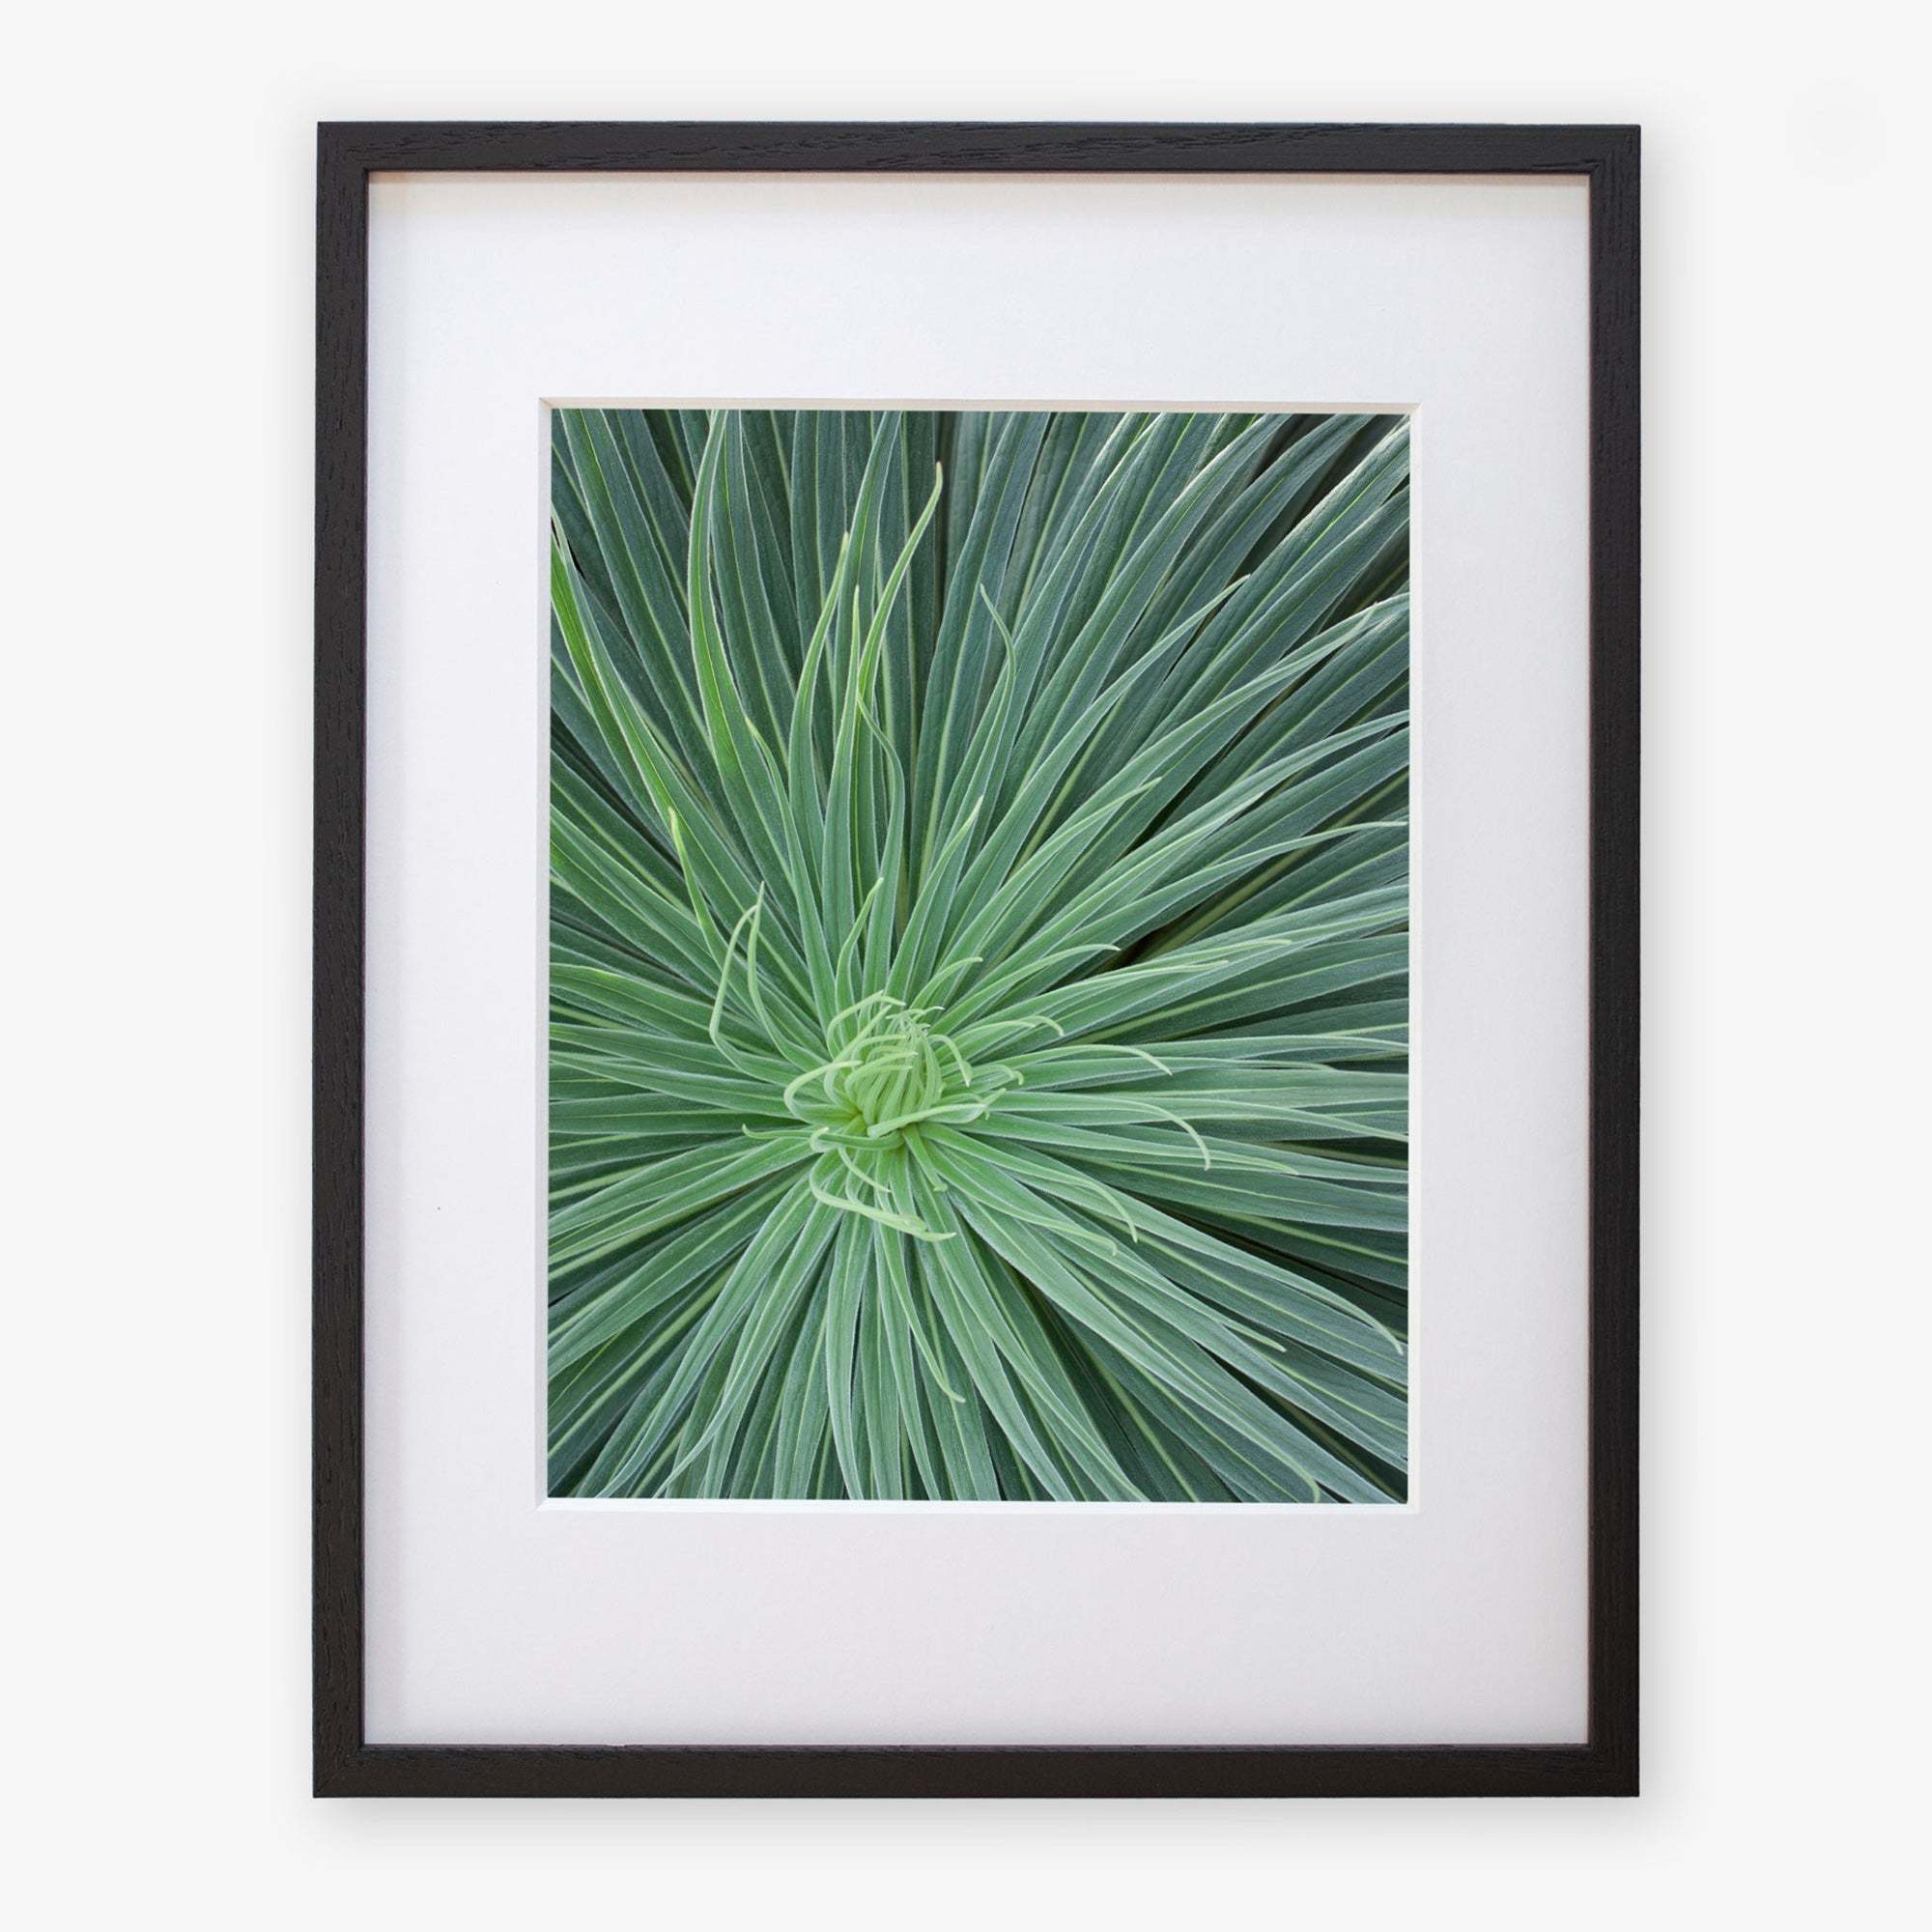 A framed photograph of Offley Green&#39;s &#39;Desert Fireworks II&#39; green botanical wall art, printed on archival photographic paper and displayed against a white background. The frame is black with a thin white mat.